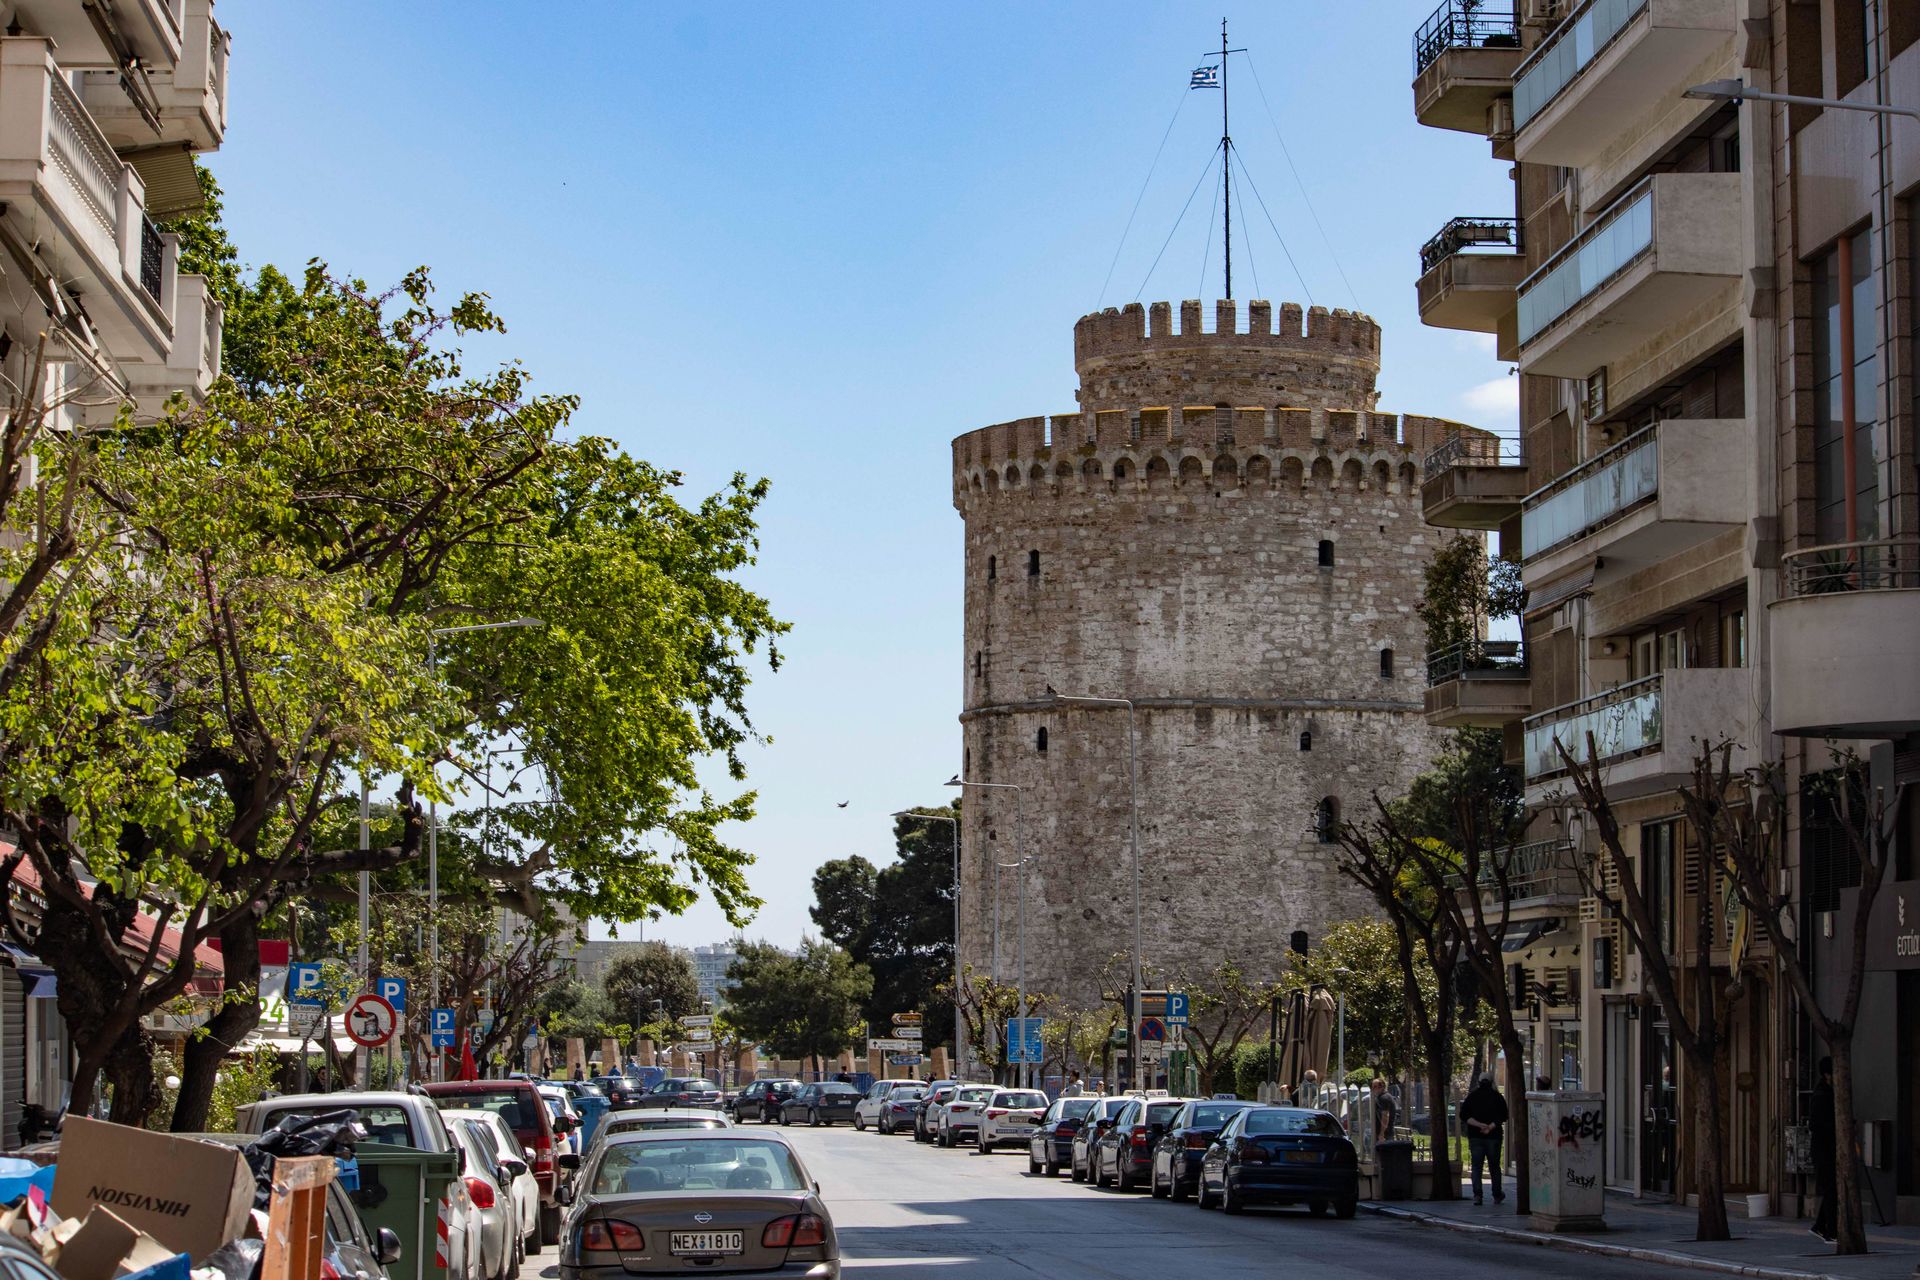 <p>In northern Greece, the port of Thessaloniki is less frequented by tourists than Athens or Crete. Yet, the city has a rich heritage that reflects the various Roman, Byzantine, and Ottoman influences. Its archaeological museum, one of the most important in the country, has an entire part devoted to Macedonia and Alexander the Great.</p>